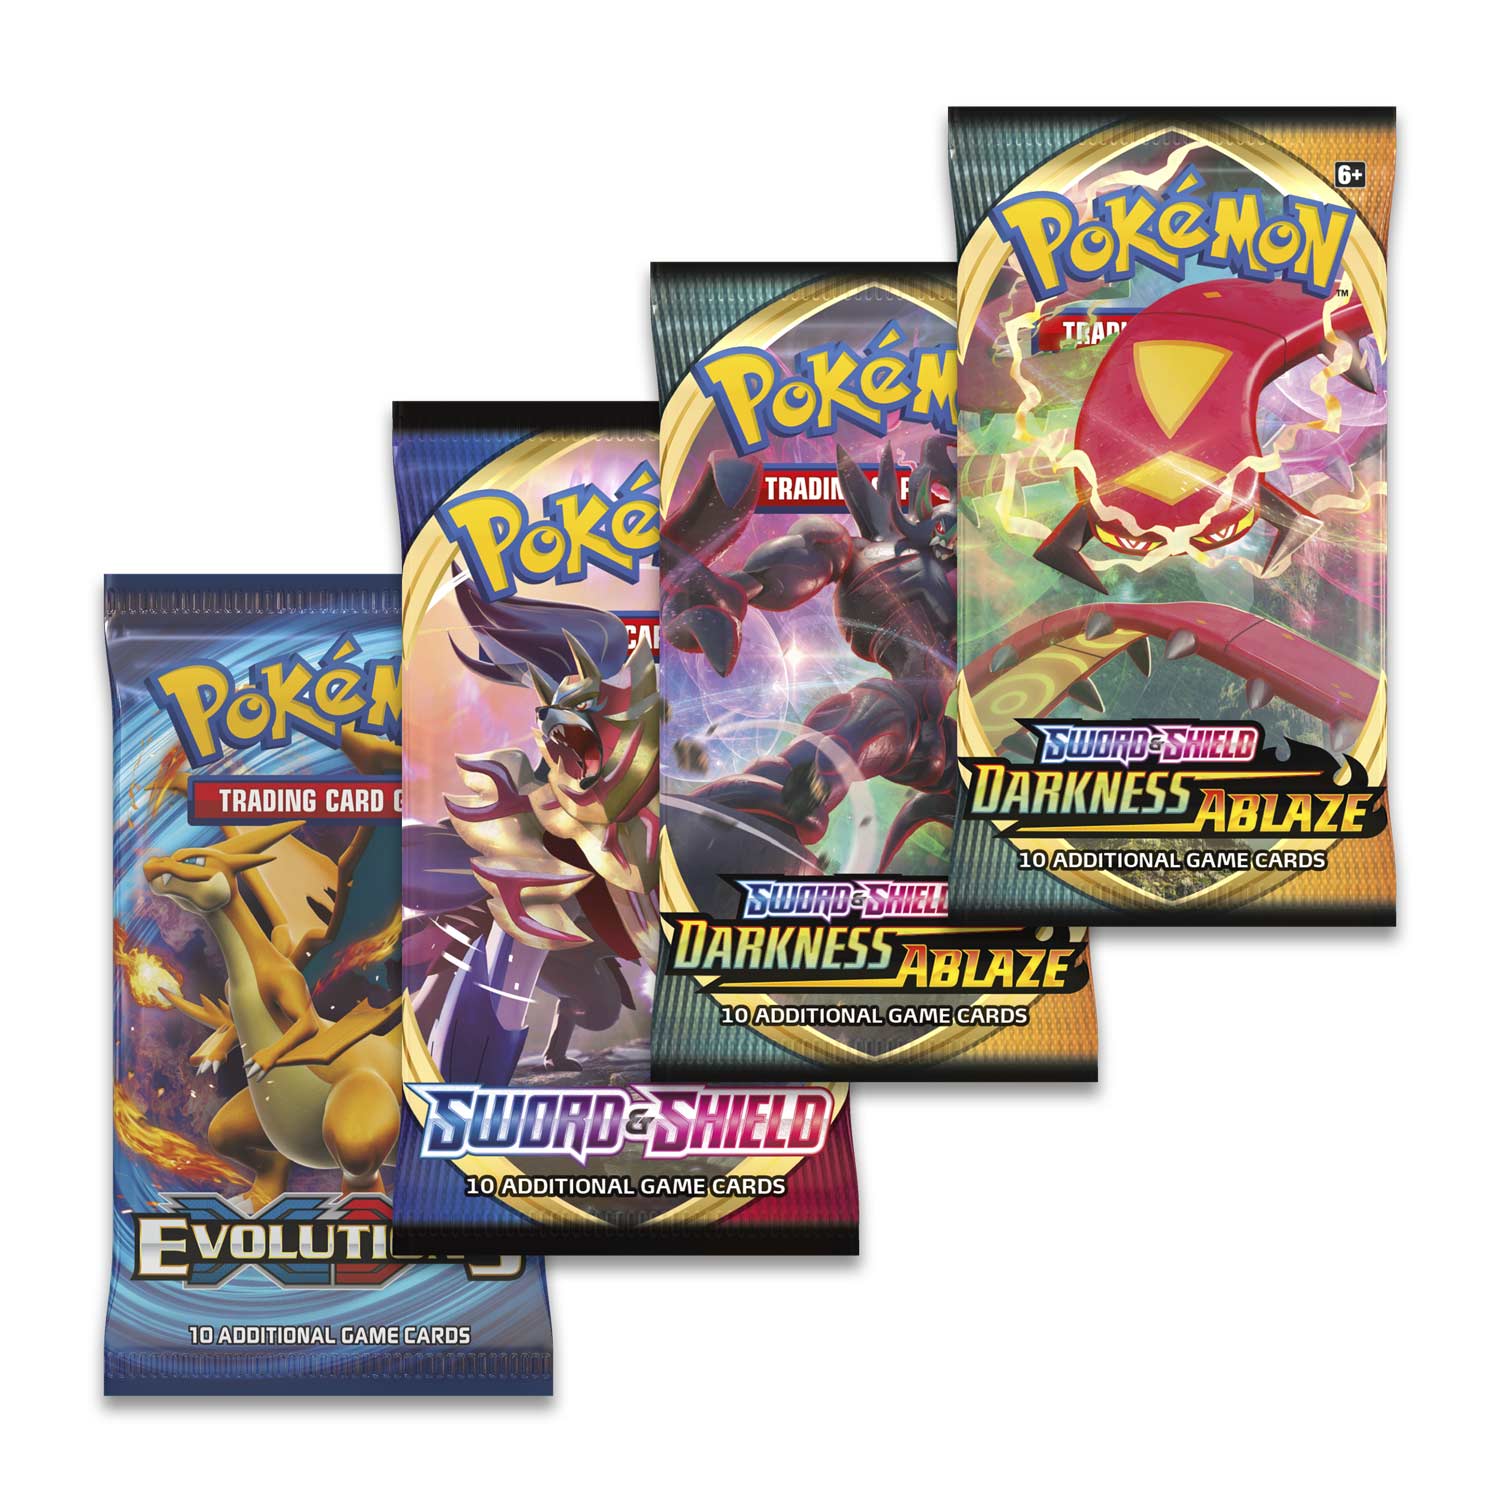 One is an Evolutions Pack Pokemon Galarian Sirfetch'd V Box 4x Booster Packs 